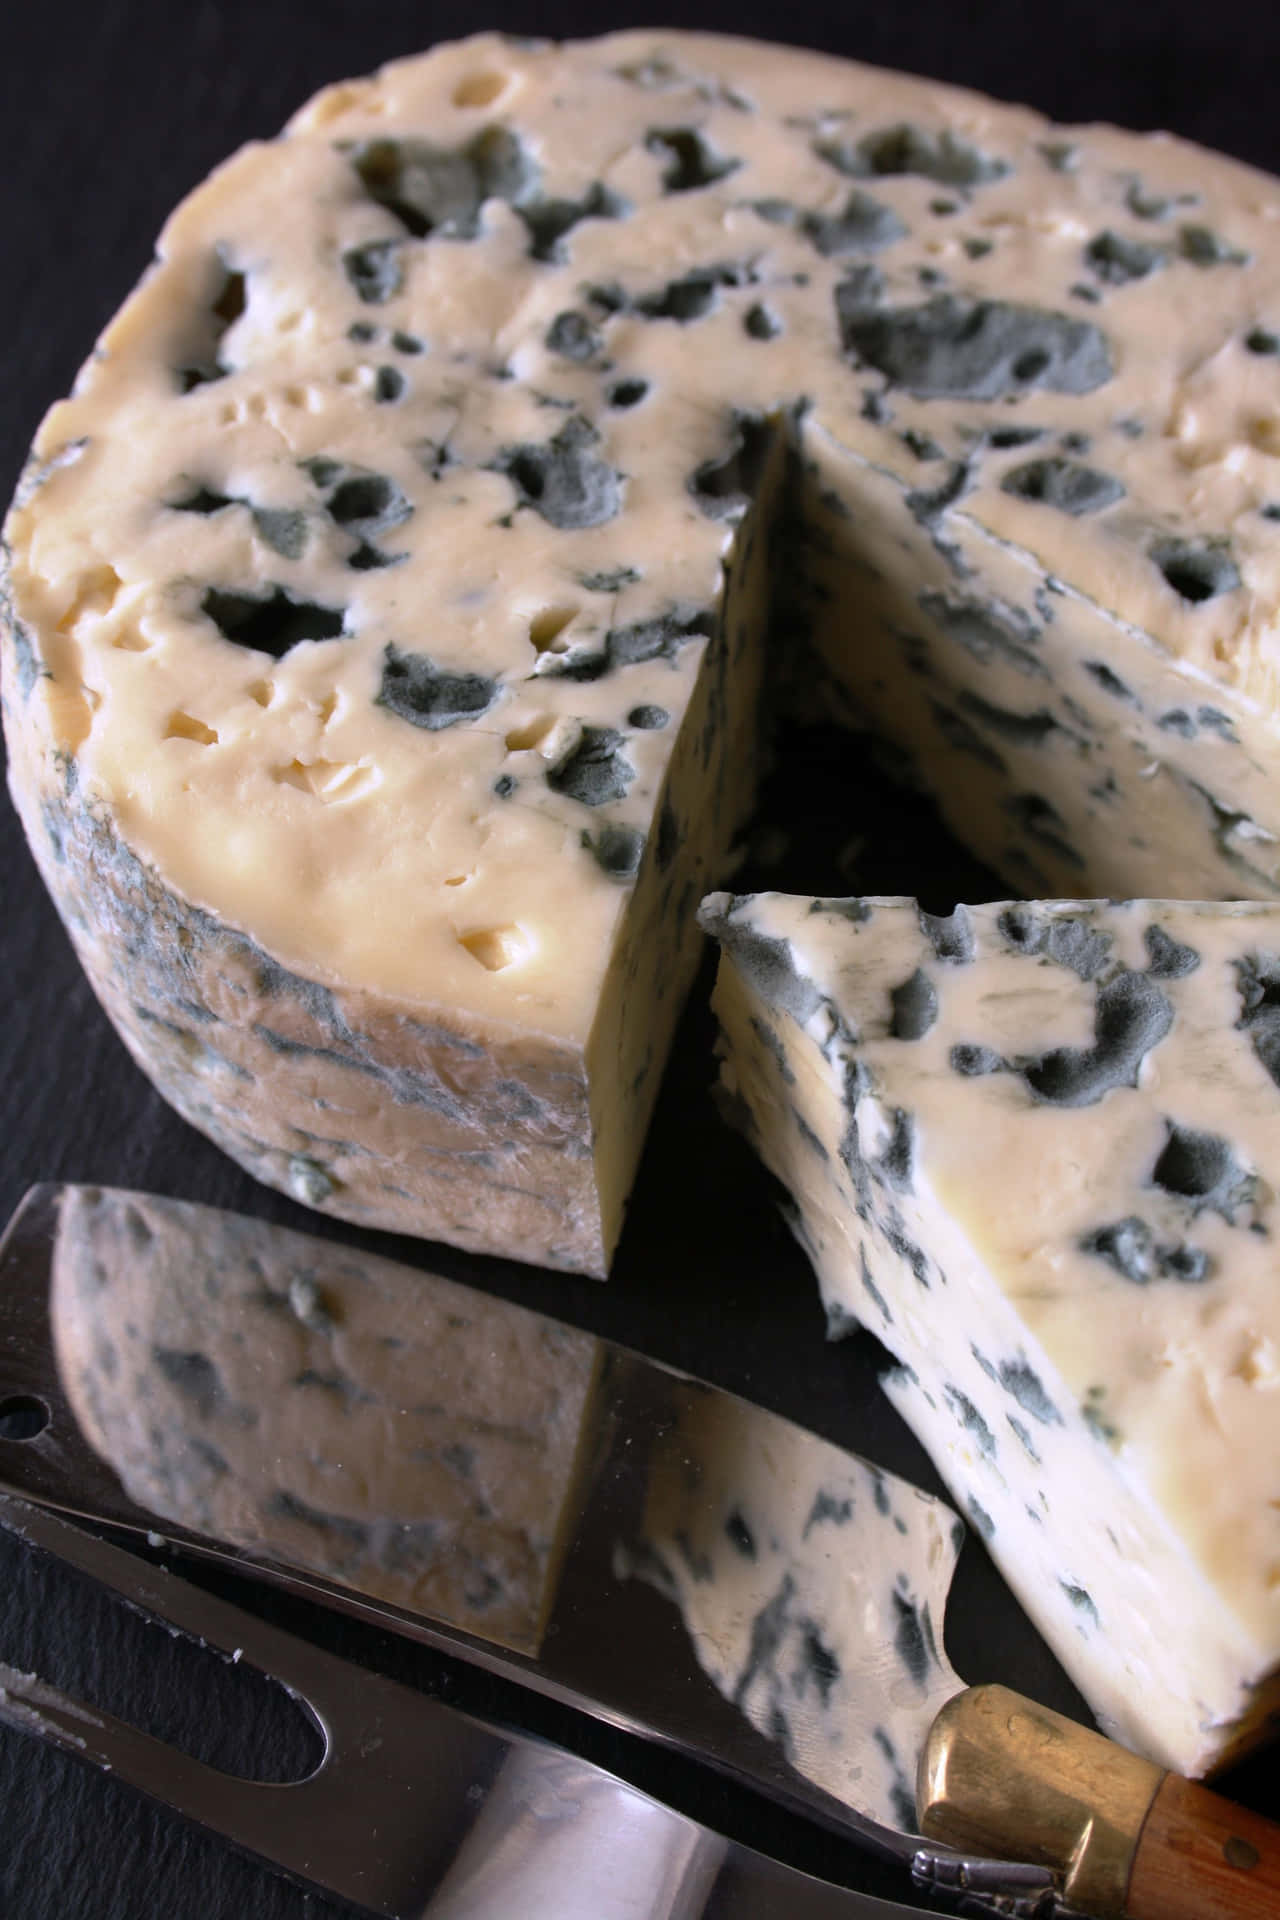 Creamy blue cheese close up Wallpaper